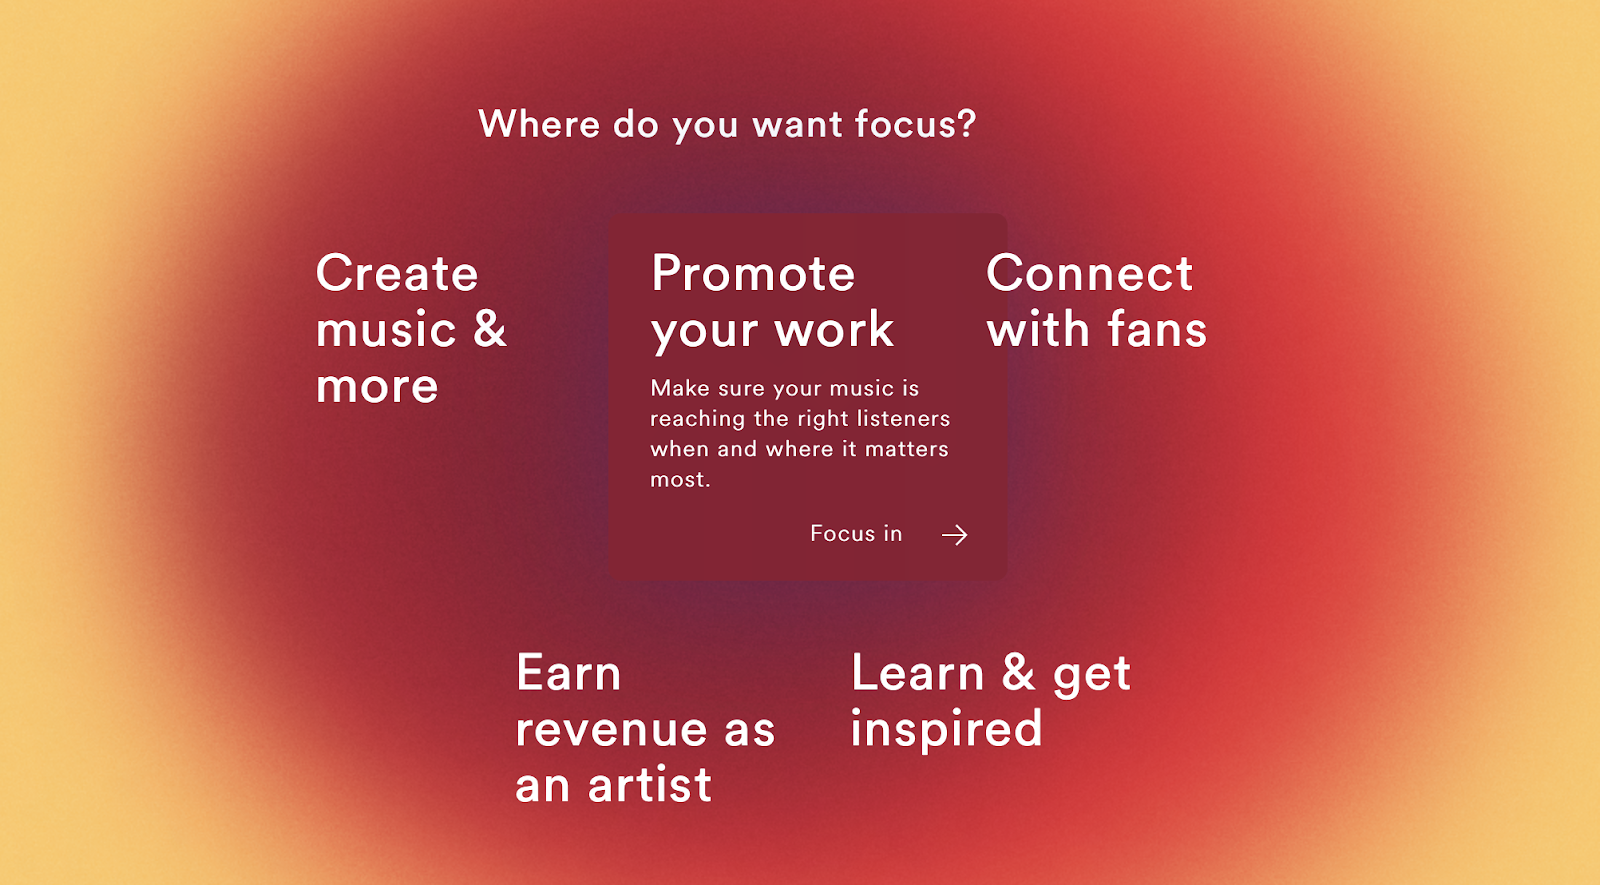 Spotify’s ‘In Focus’ gives you a free manager?